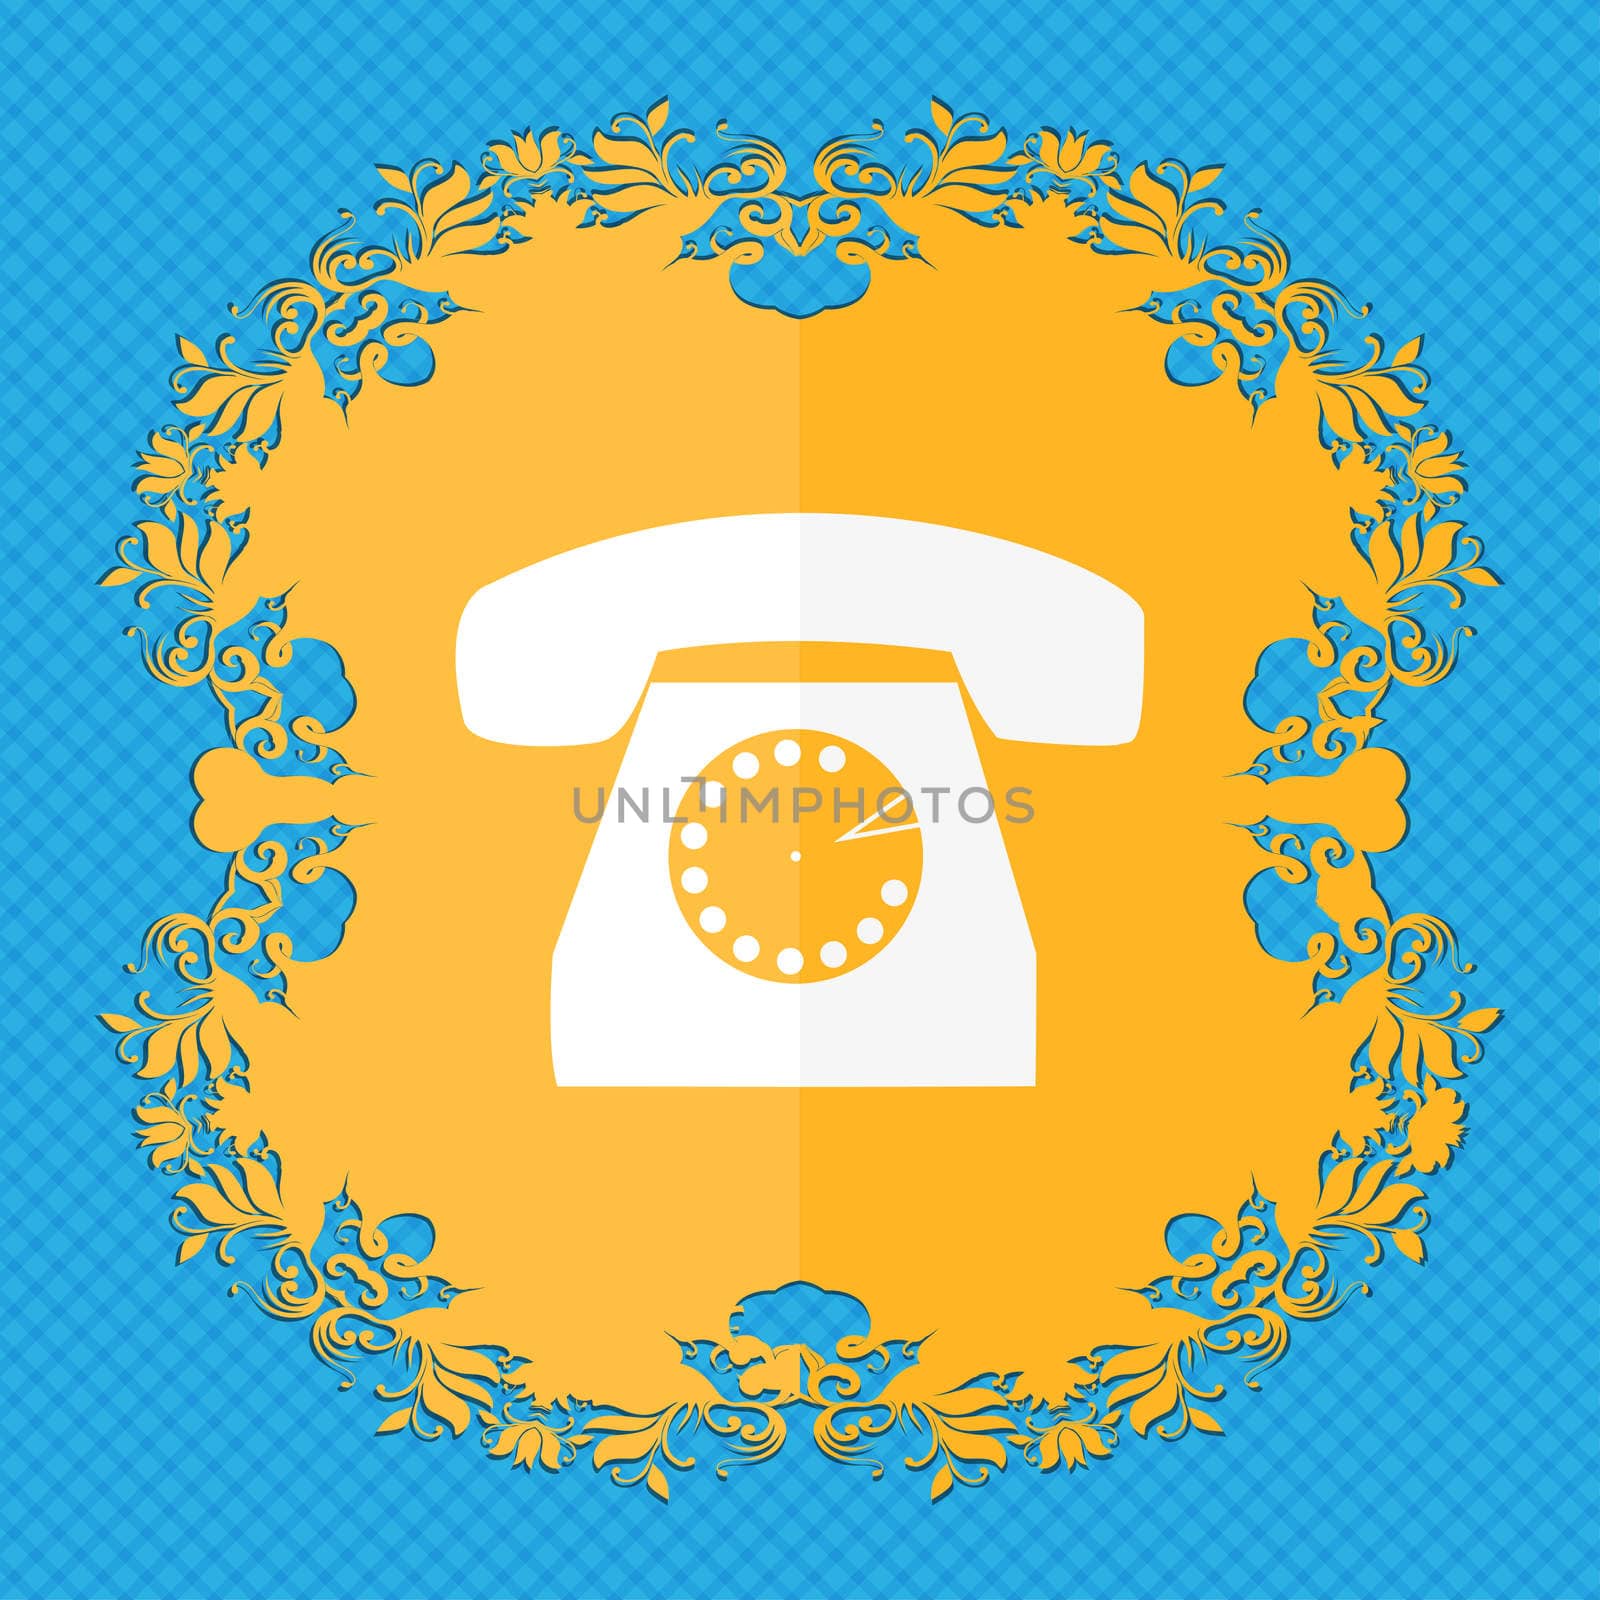 Retro telephone icon symbol. Floral flat design on a blue abstract background with place for your text. illustration